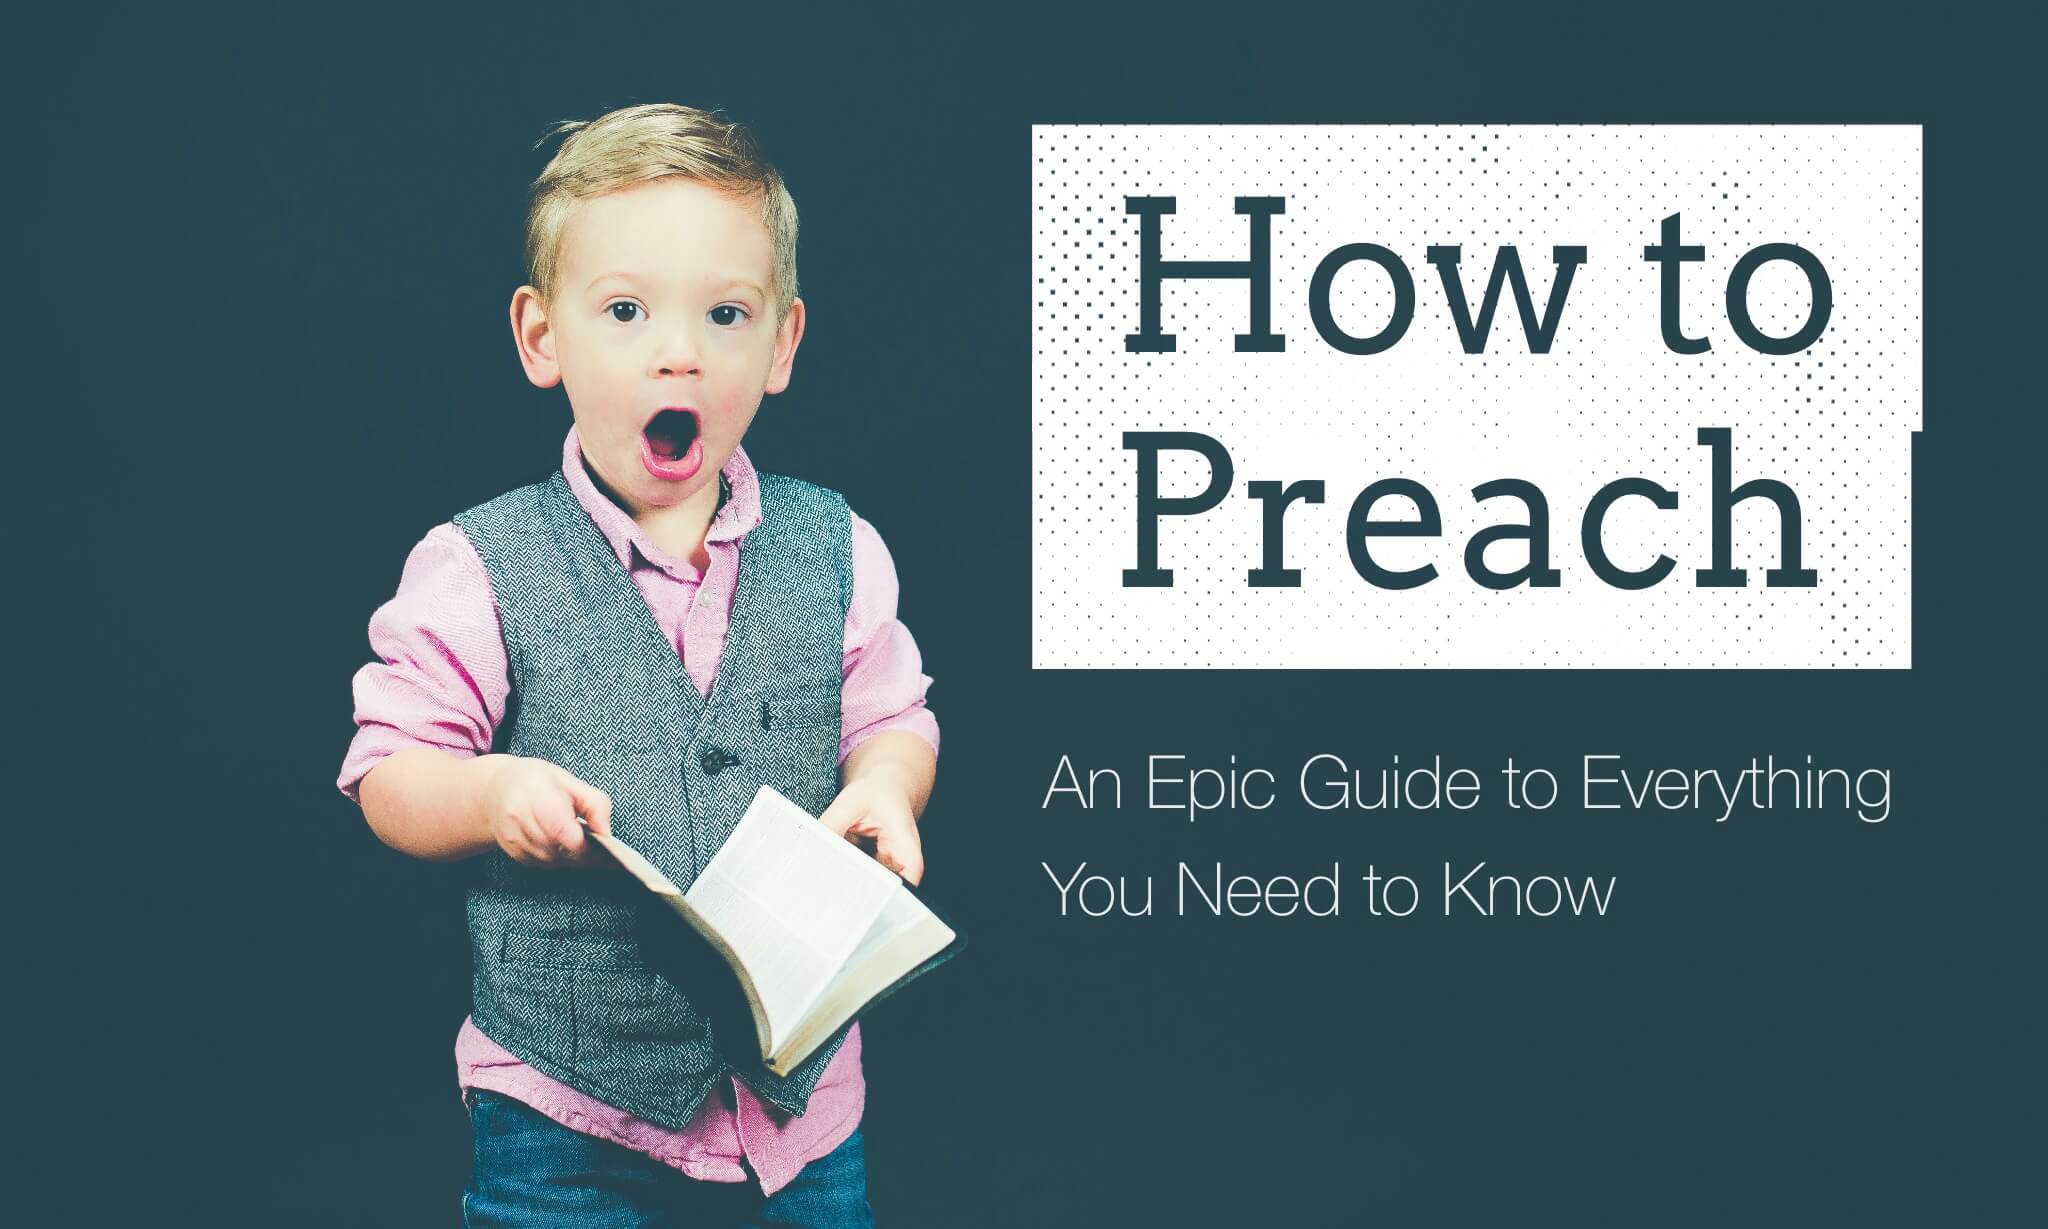 How to Preach: An Epic Guide to Everything You Need to Know